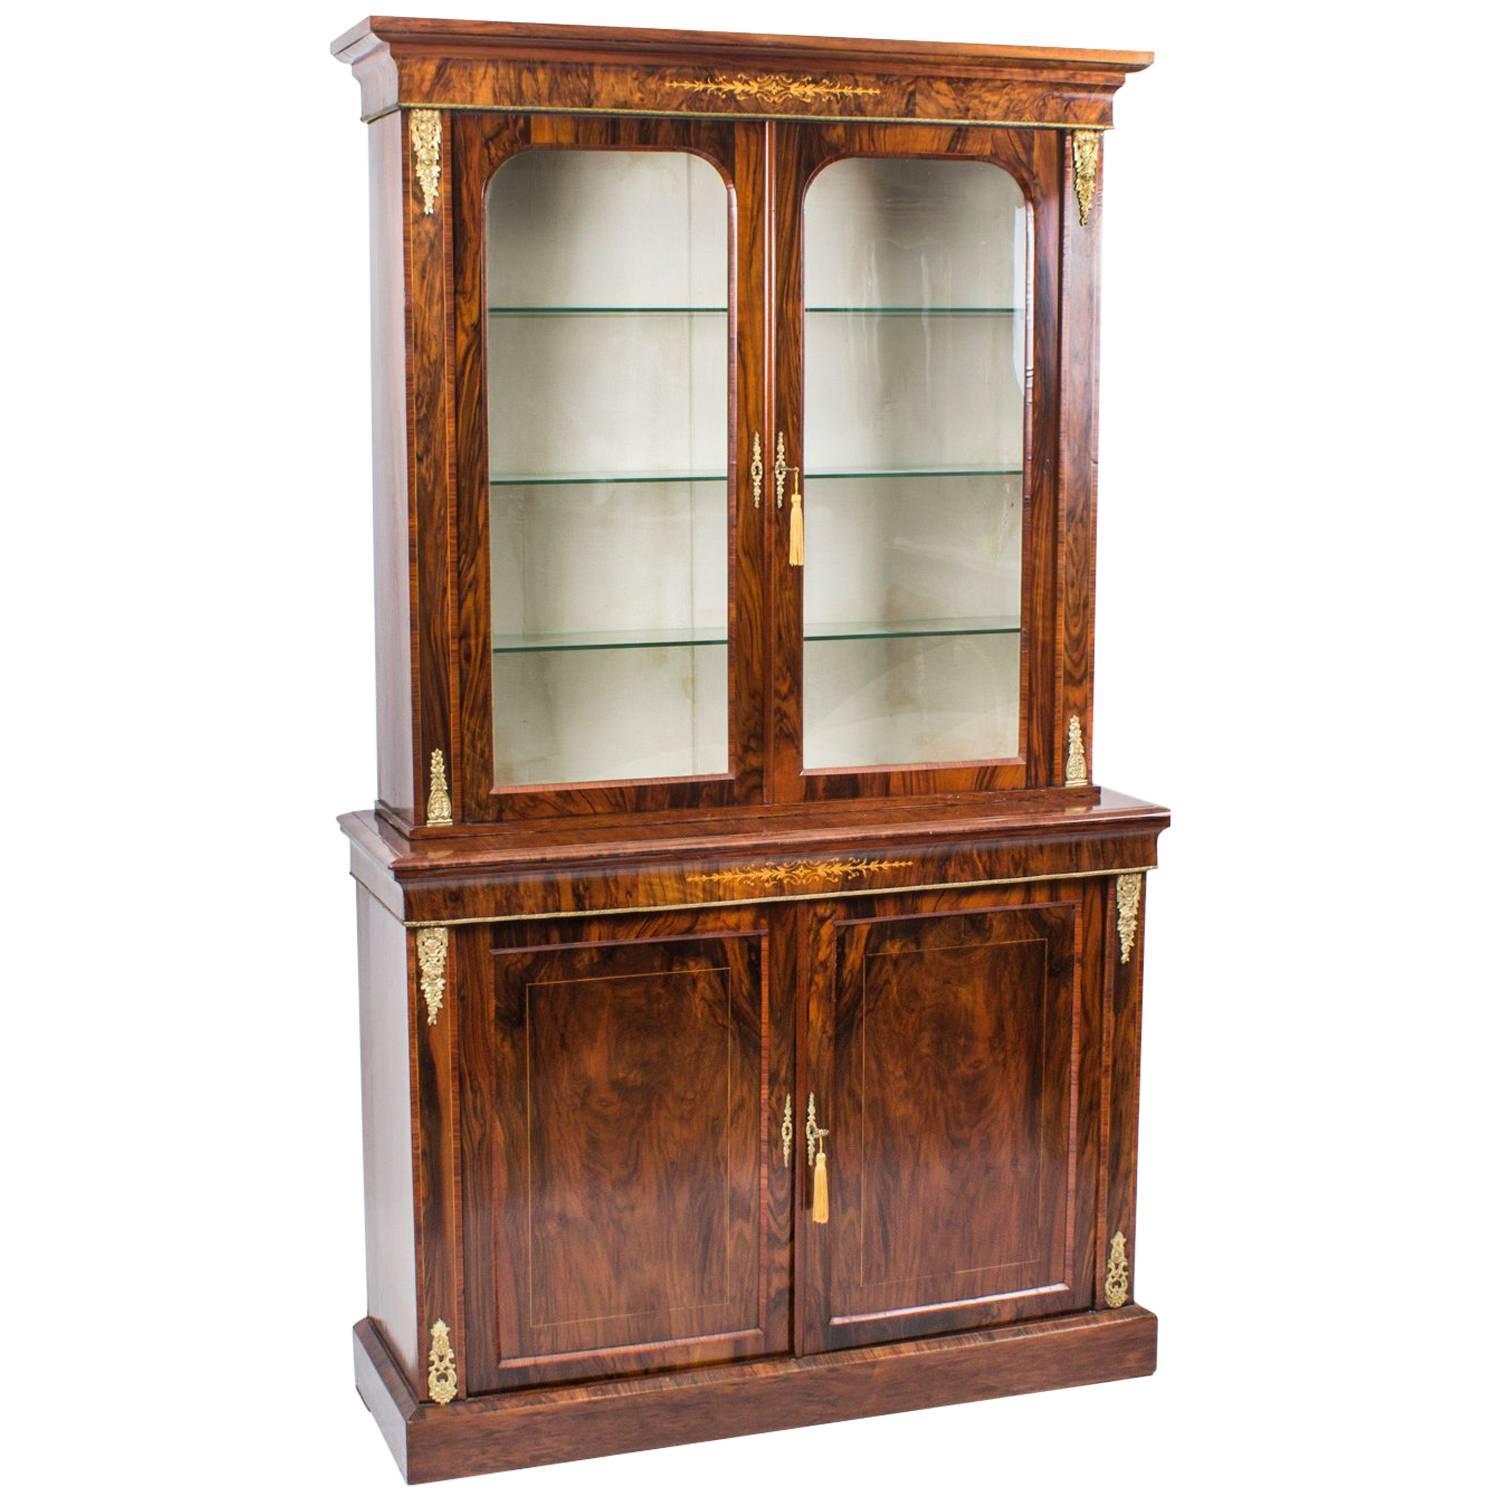 19th Century Burr Walnut and Inlaid Bookcase Display Cabinet